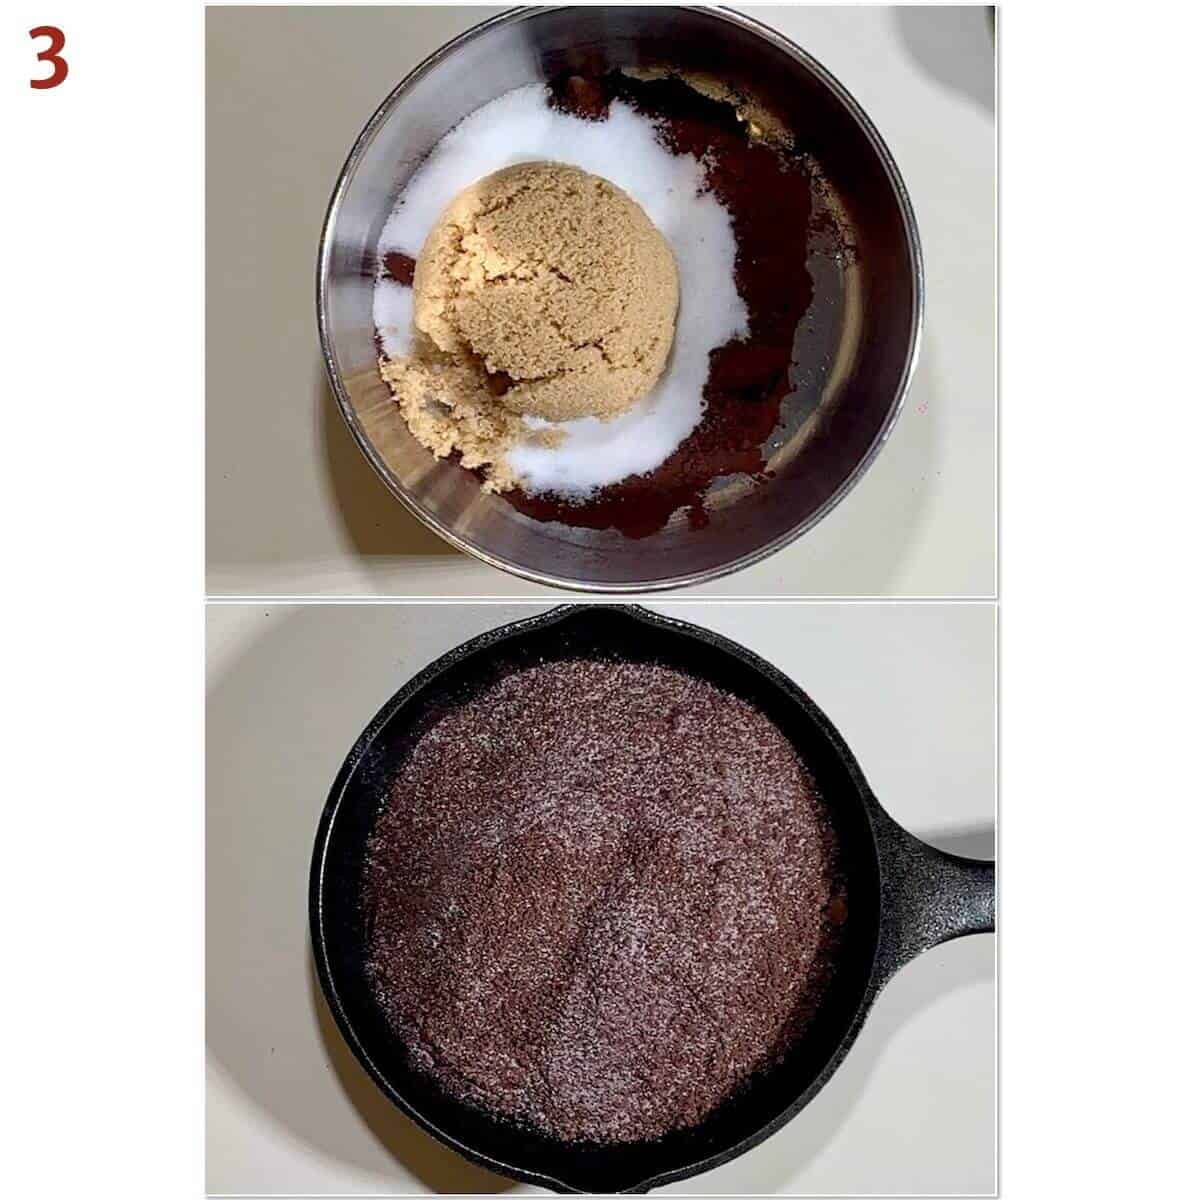 Collage of mixing pudding cake topping ingredients.